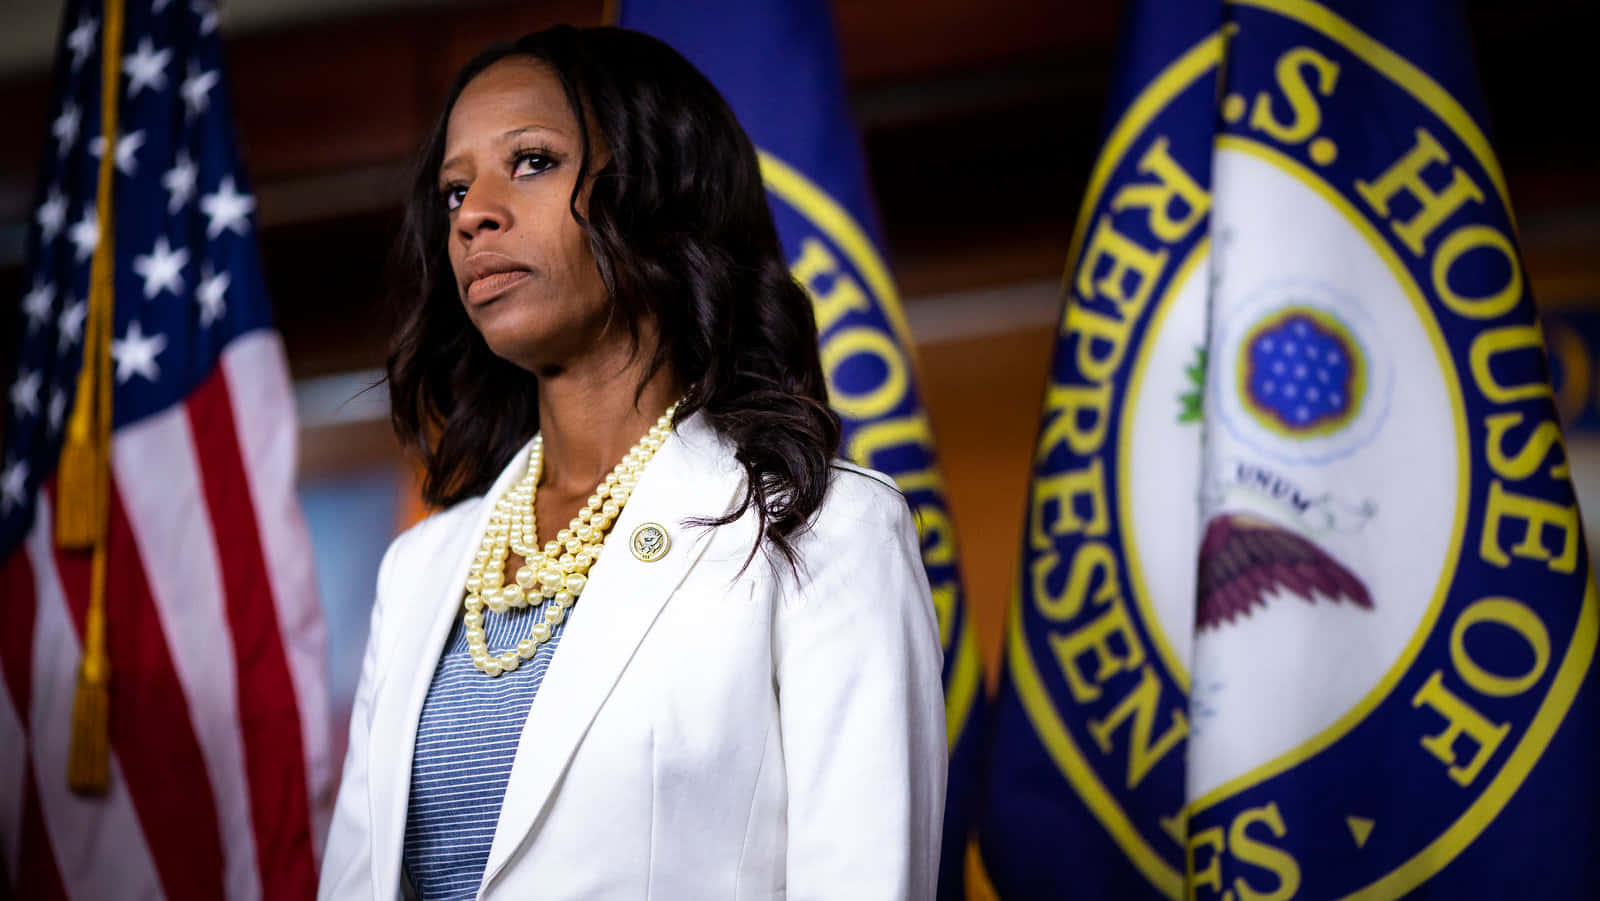 Mia Love Speaking at a Press Conference Wallpaper